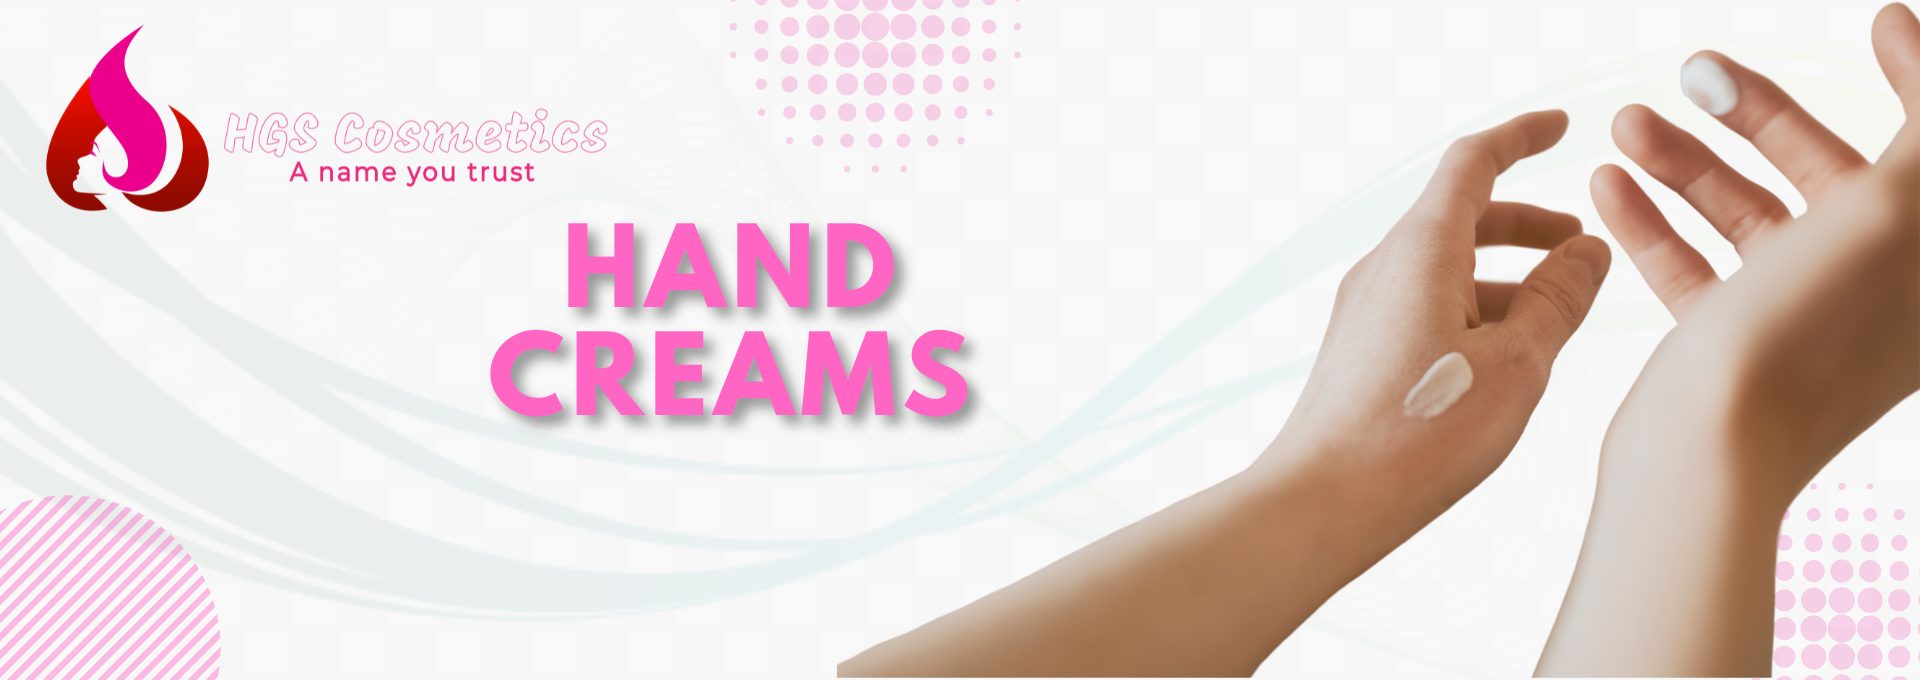 Shop Best Hand Creams products Online @ HGS Cosmetics